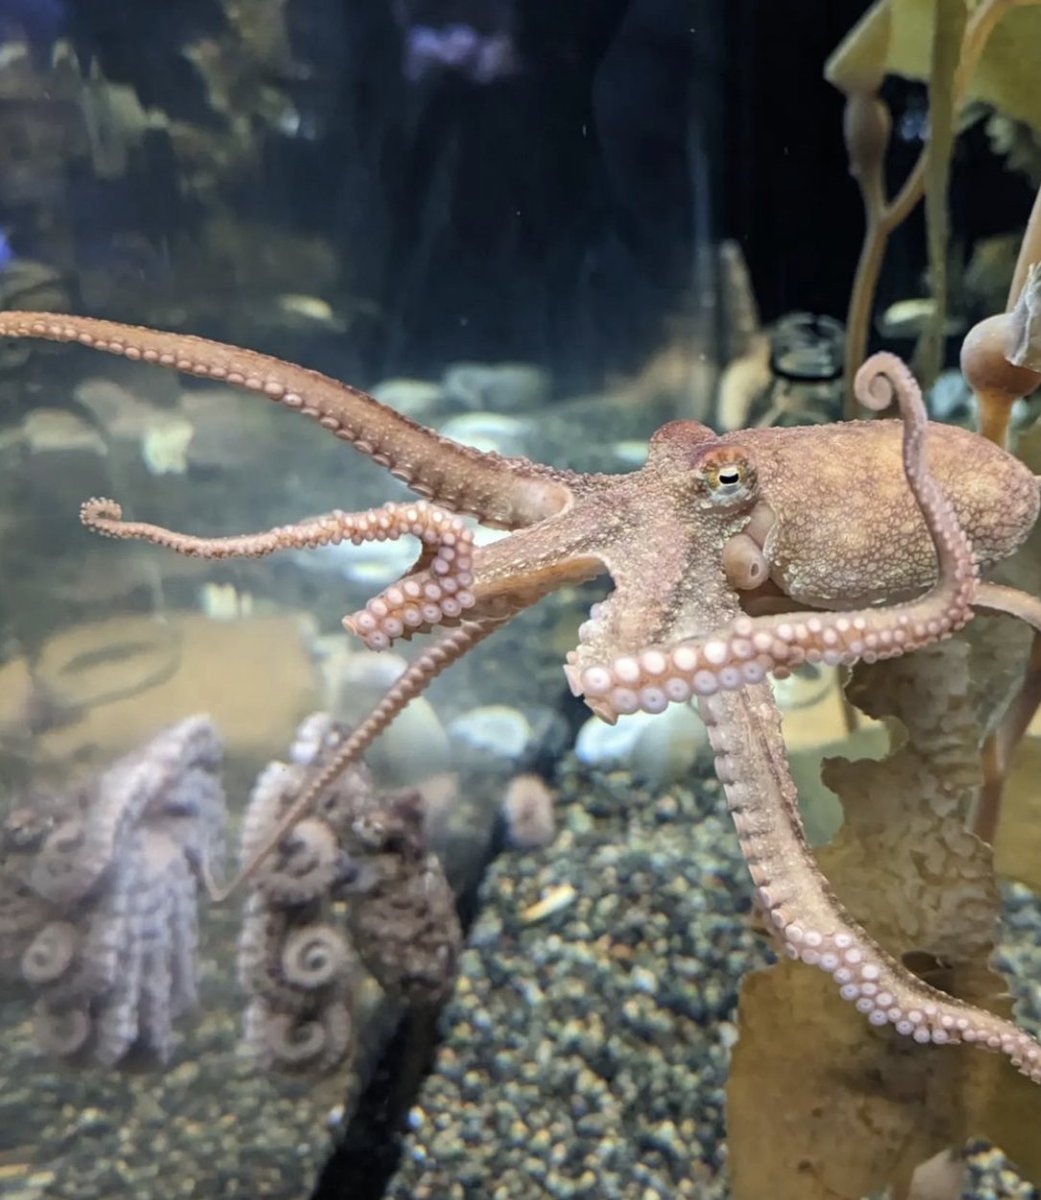 3/5 They have three hearts! Two pump blood to the gills, while the third circulates it throughout the body.
#OctopusDay #worldoctopusday #octopus #aquarium #thingstodoinSanFrancisco